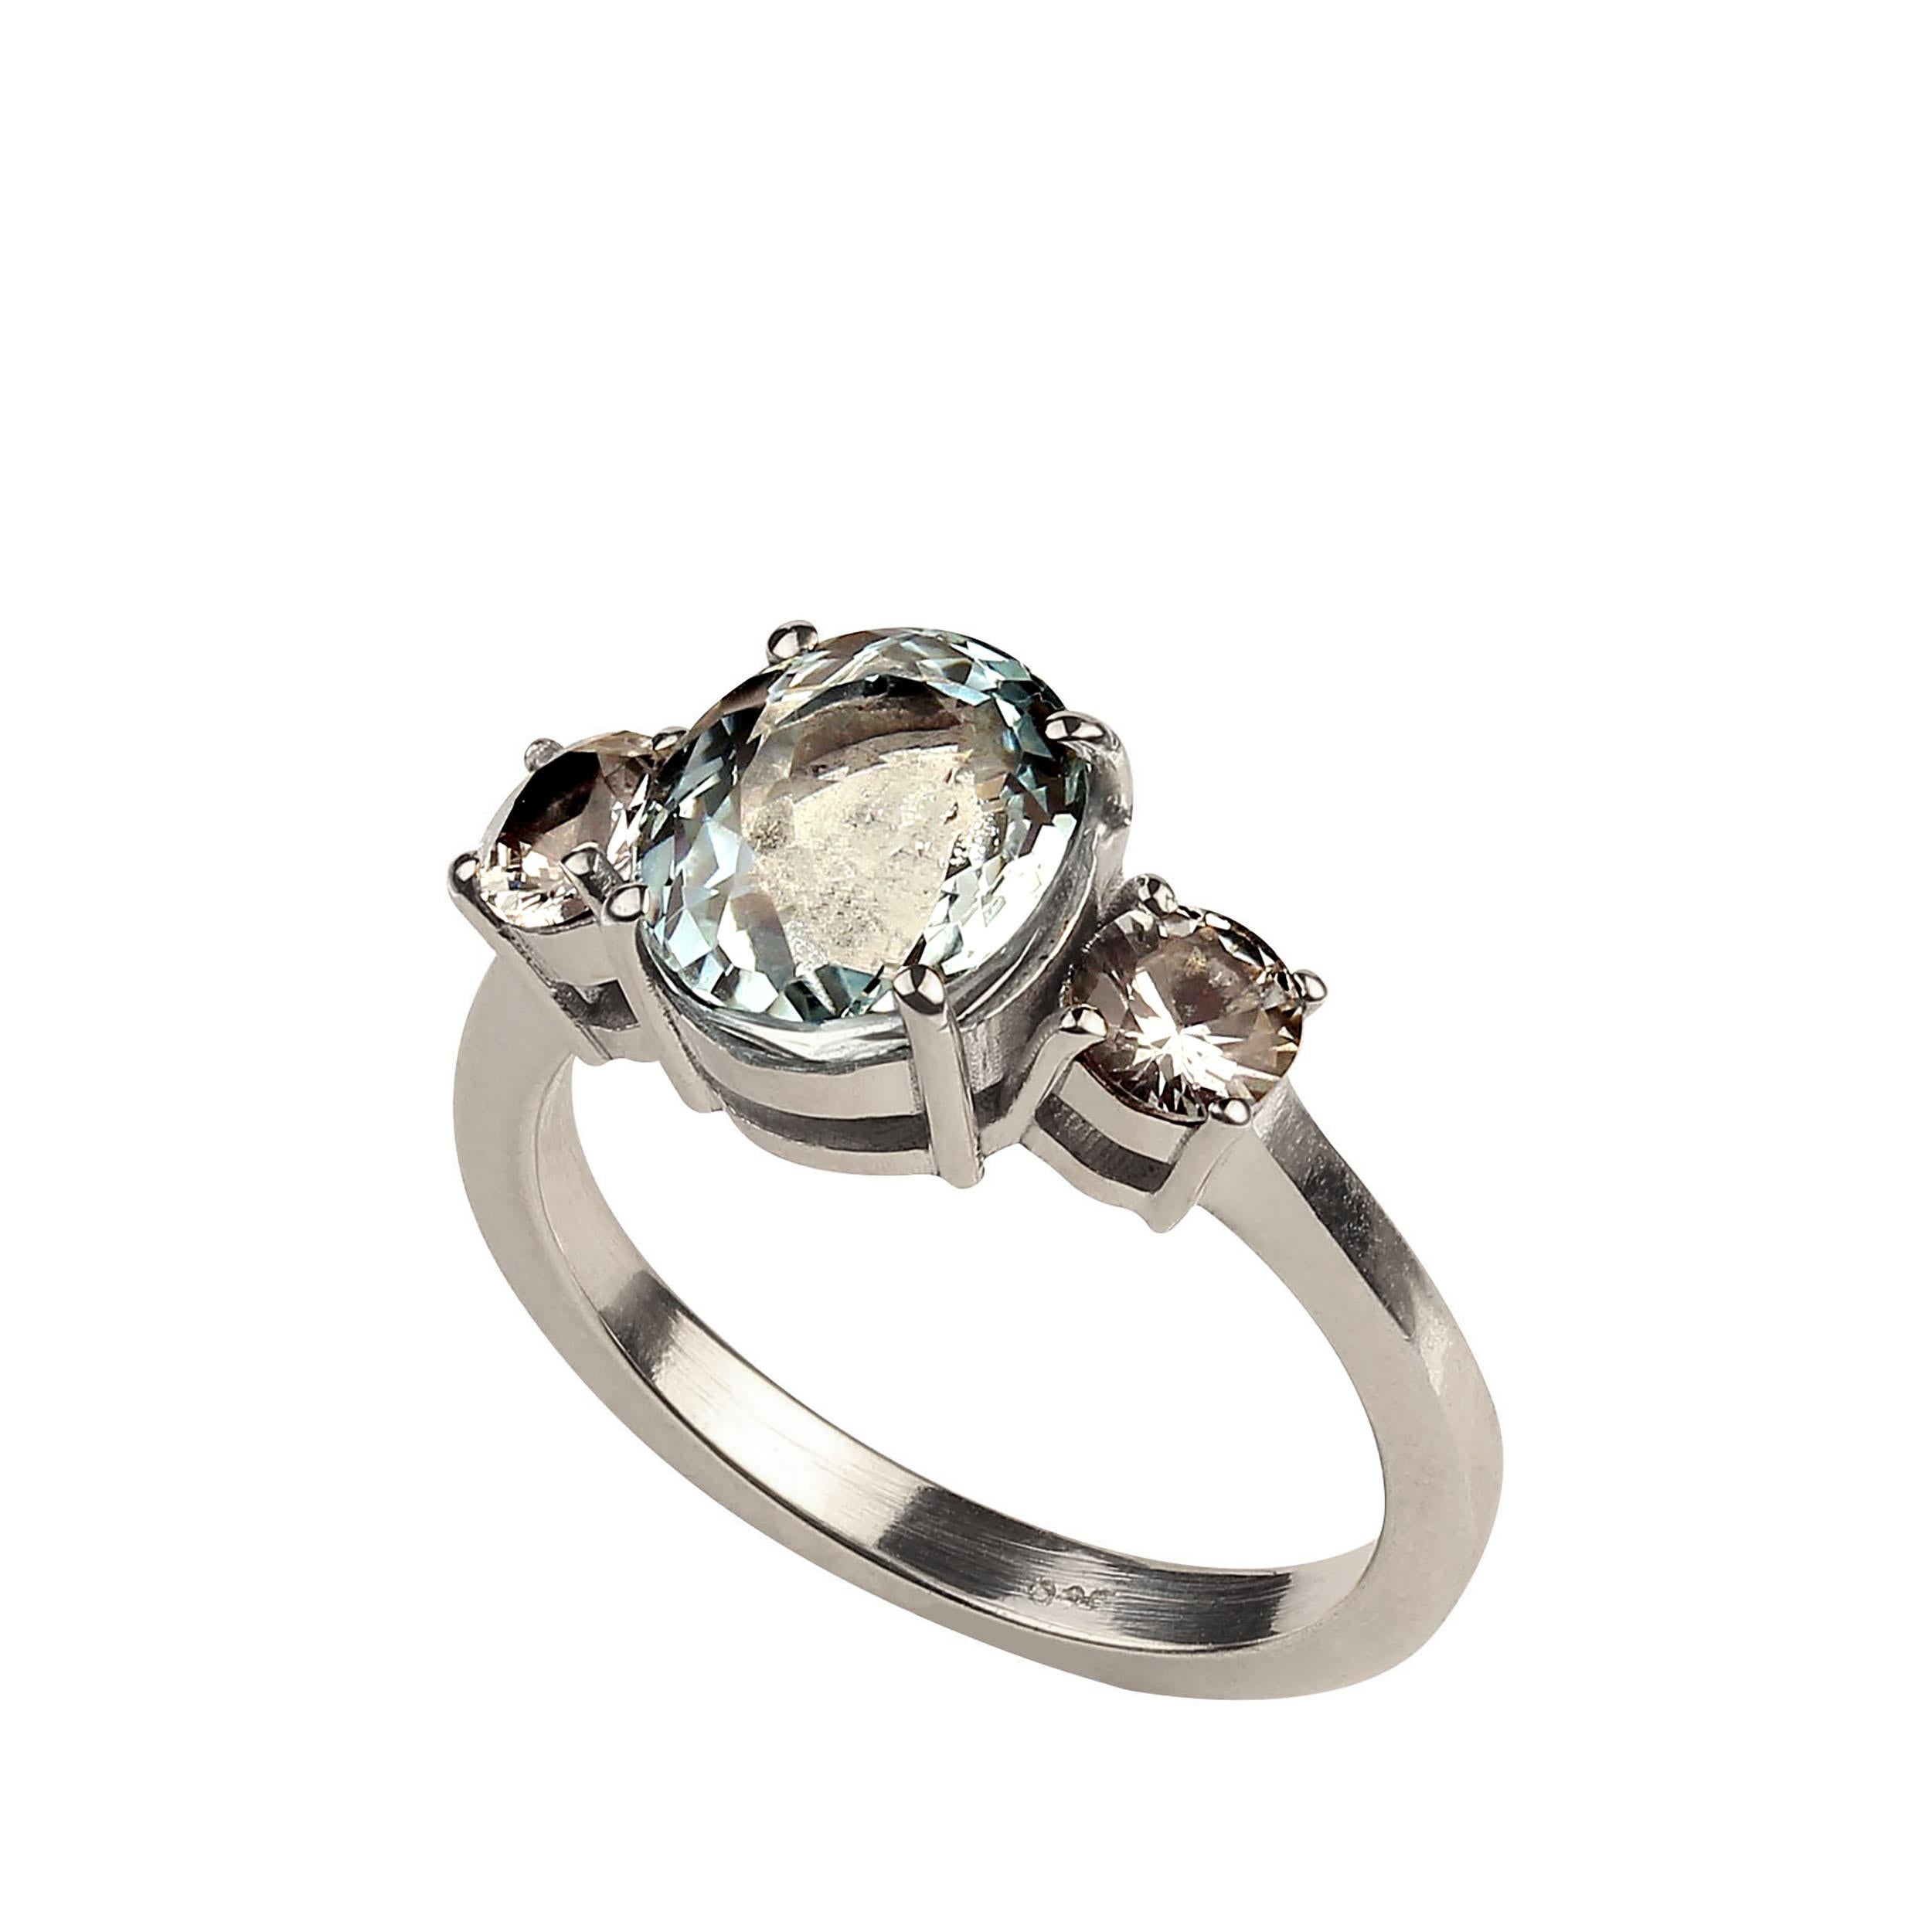 Women's AJD 2.8ct Sparkling Oval Aquamarine and White Sapphire in Sterling Silver Ring